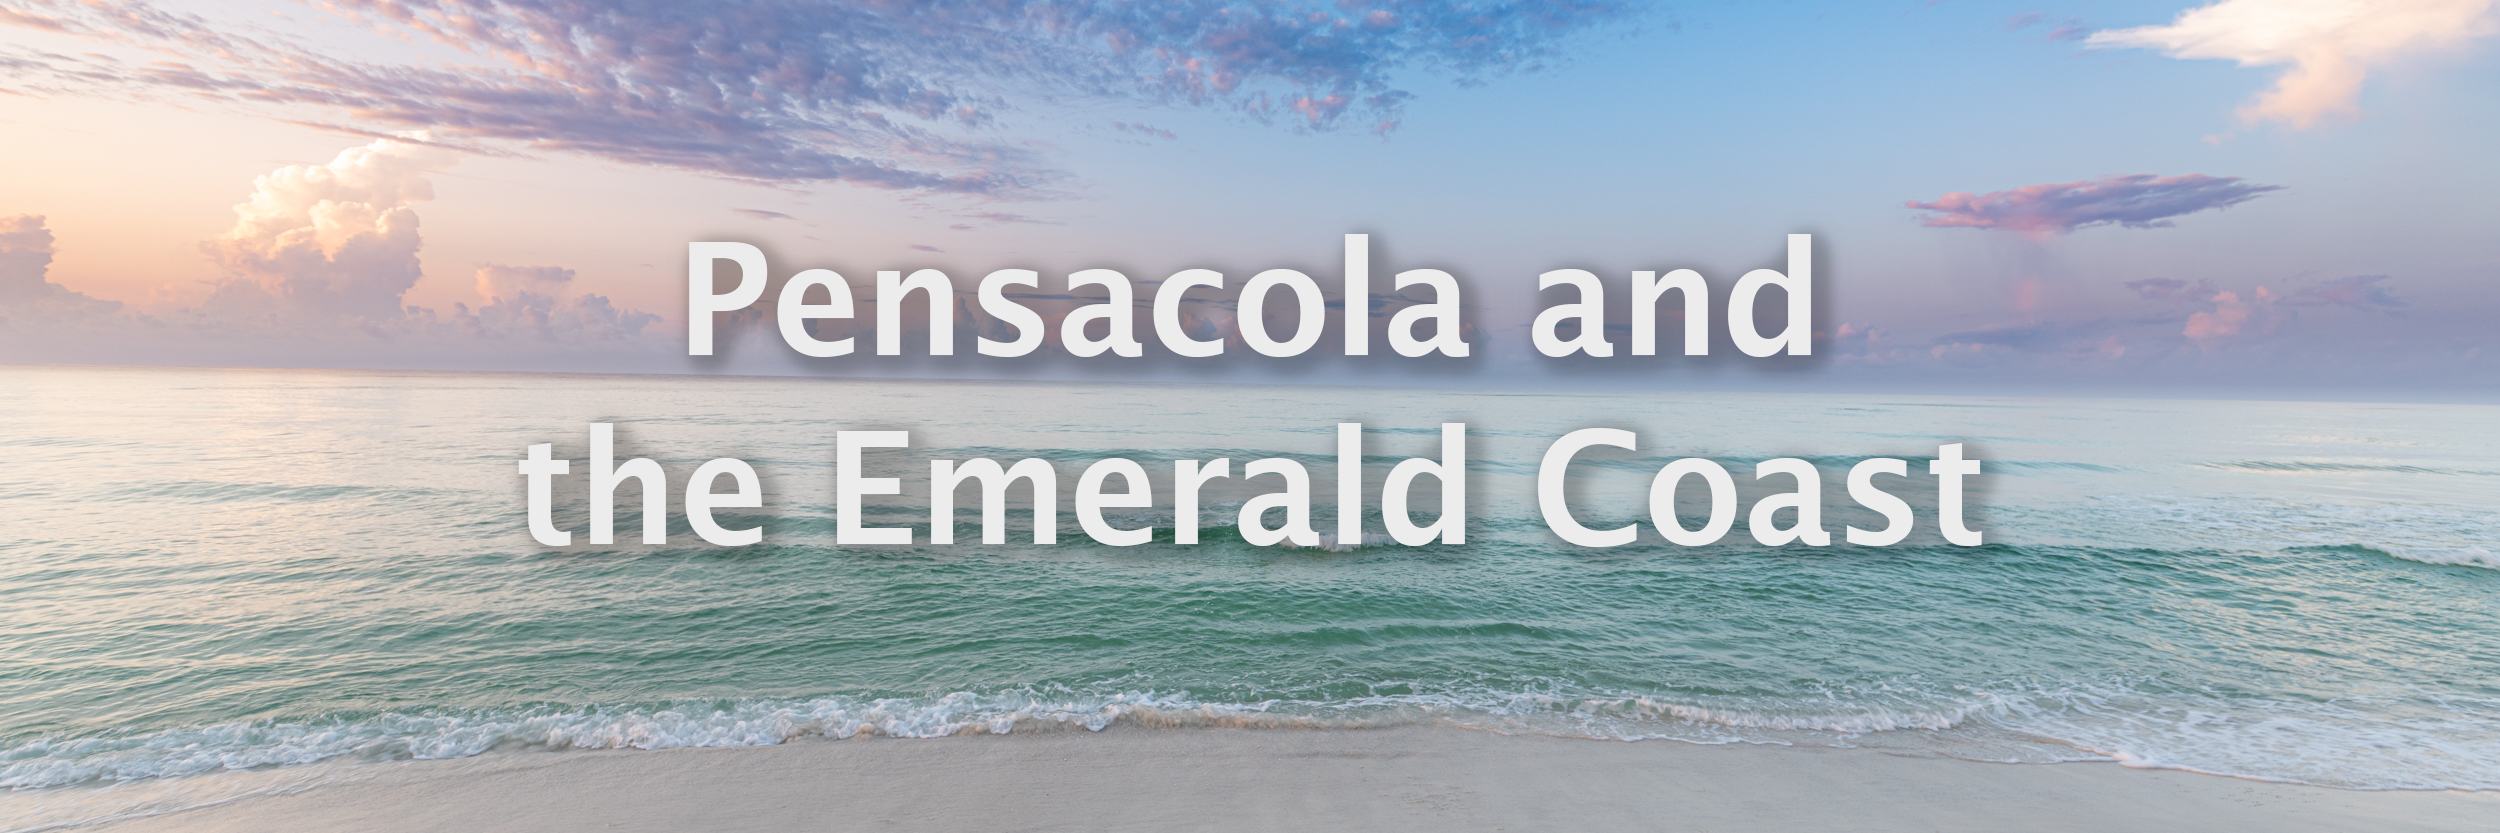 pensacola_and_the.png